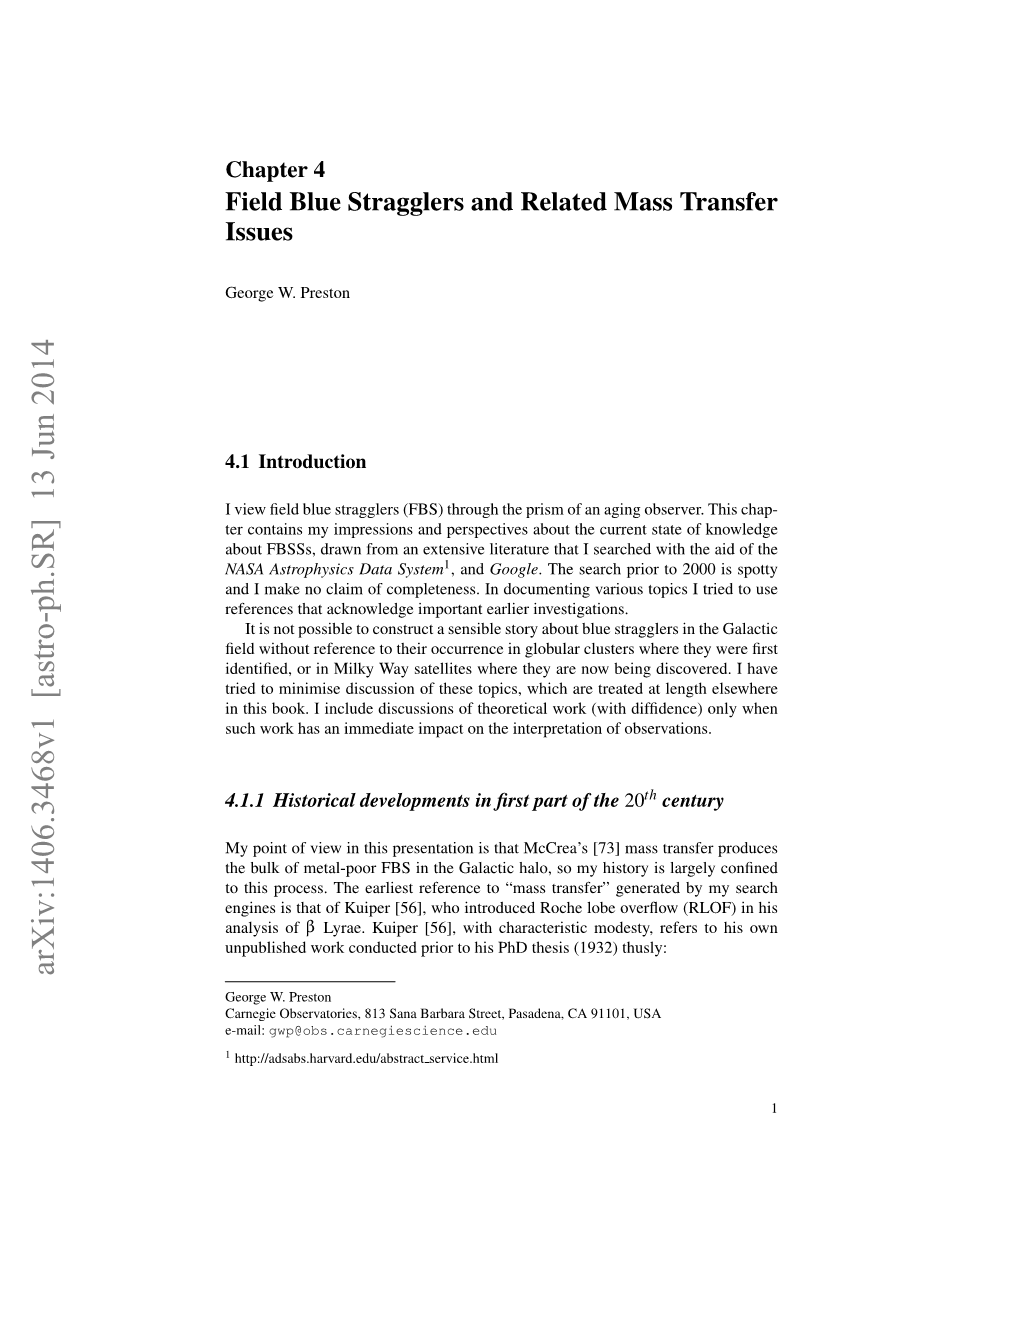 Field Blue Stragglers and Related Mass Transfer Issues